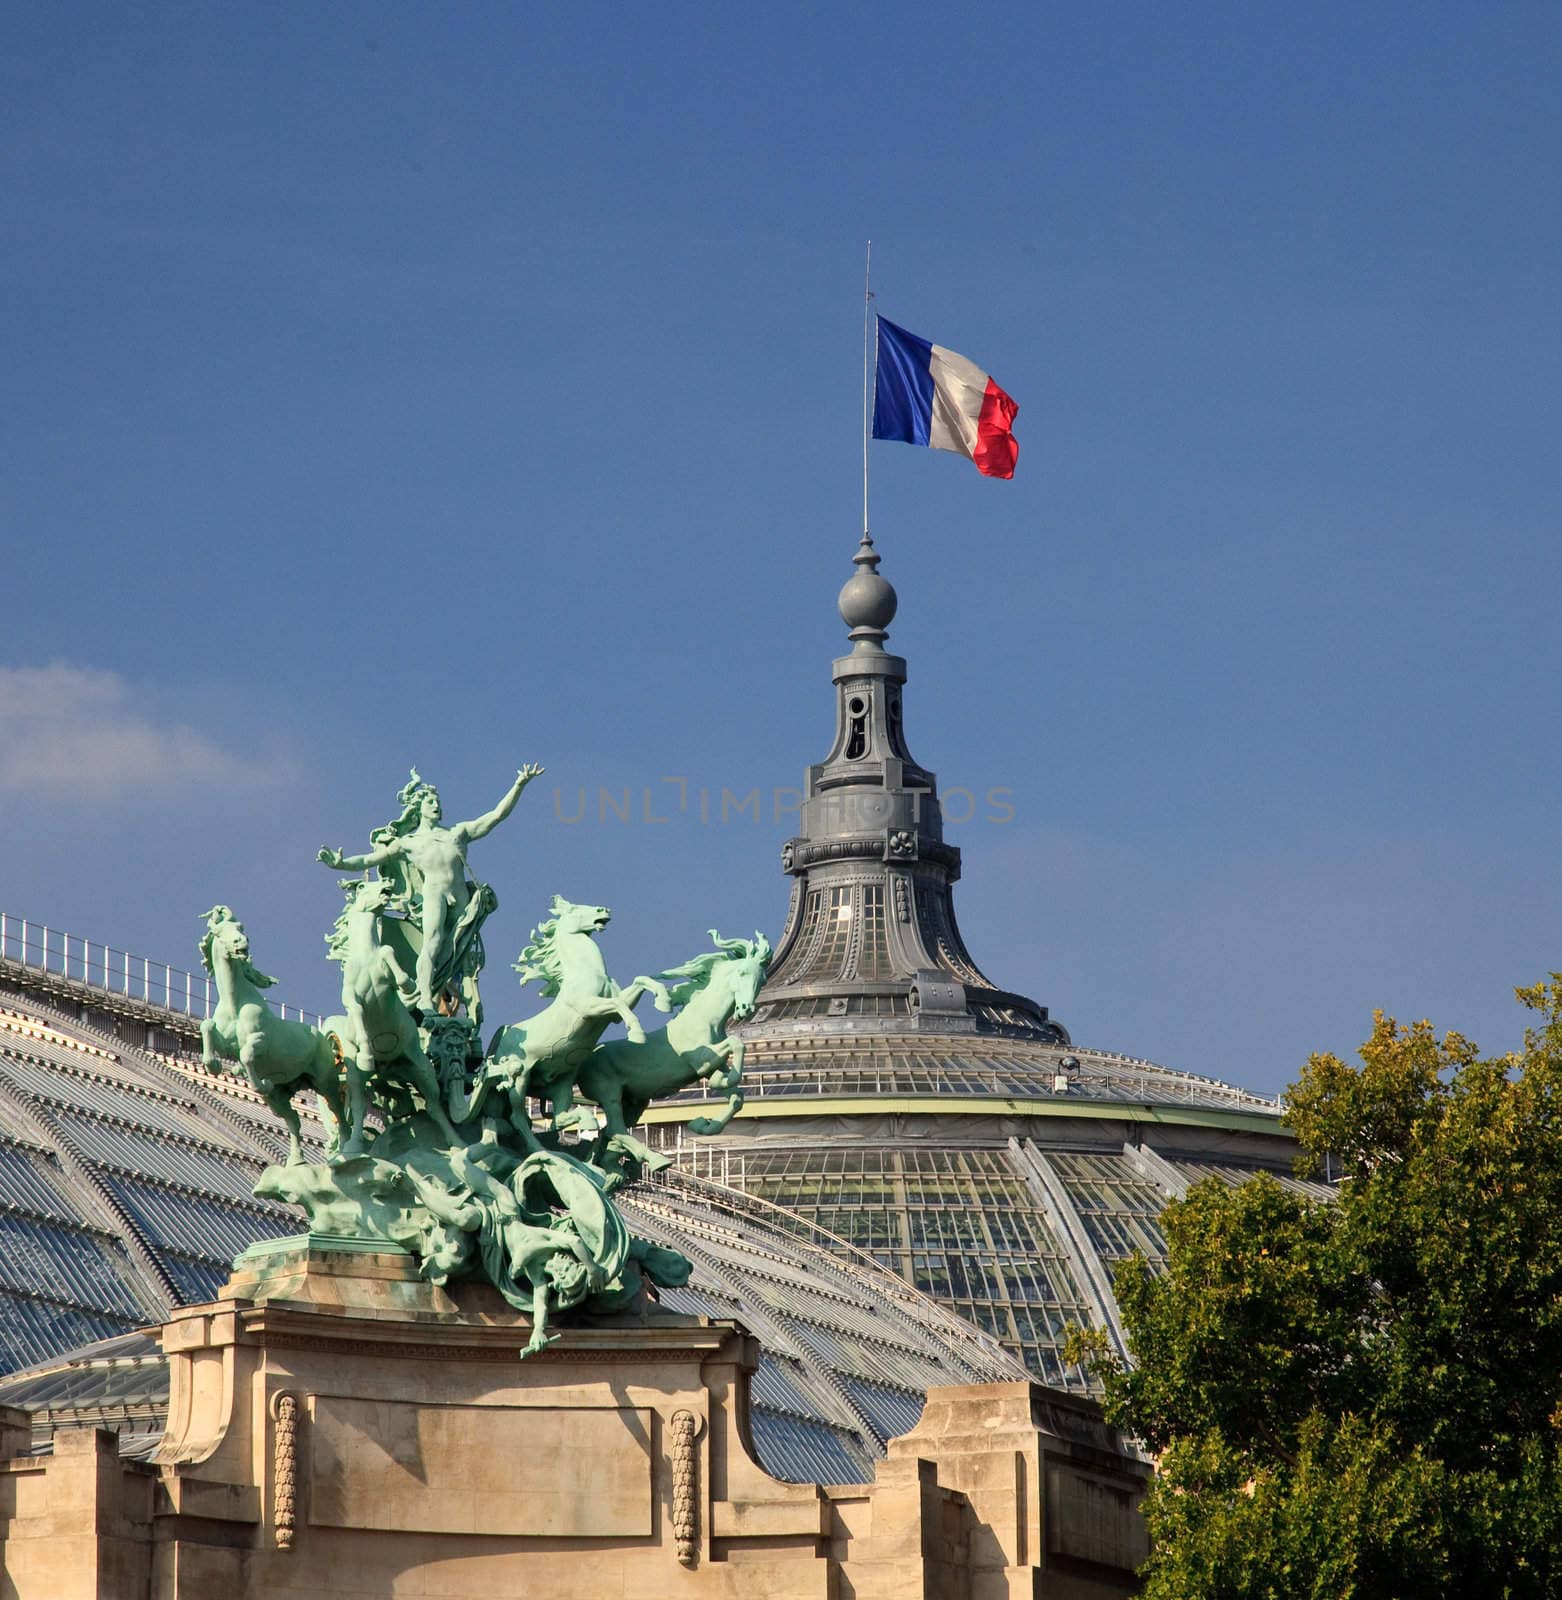 Grand Palais in Paris with green statue in foreground